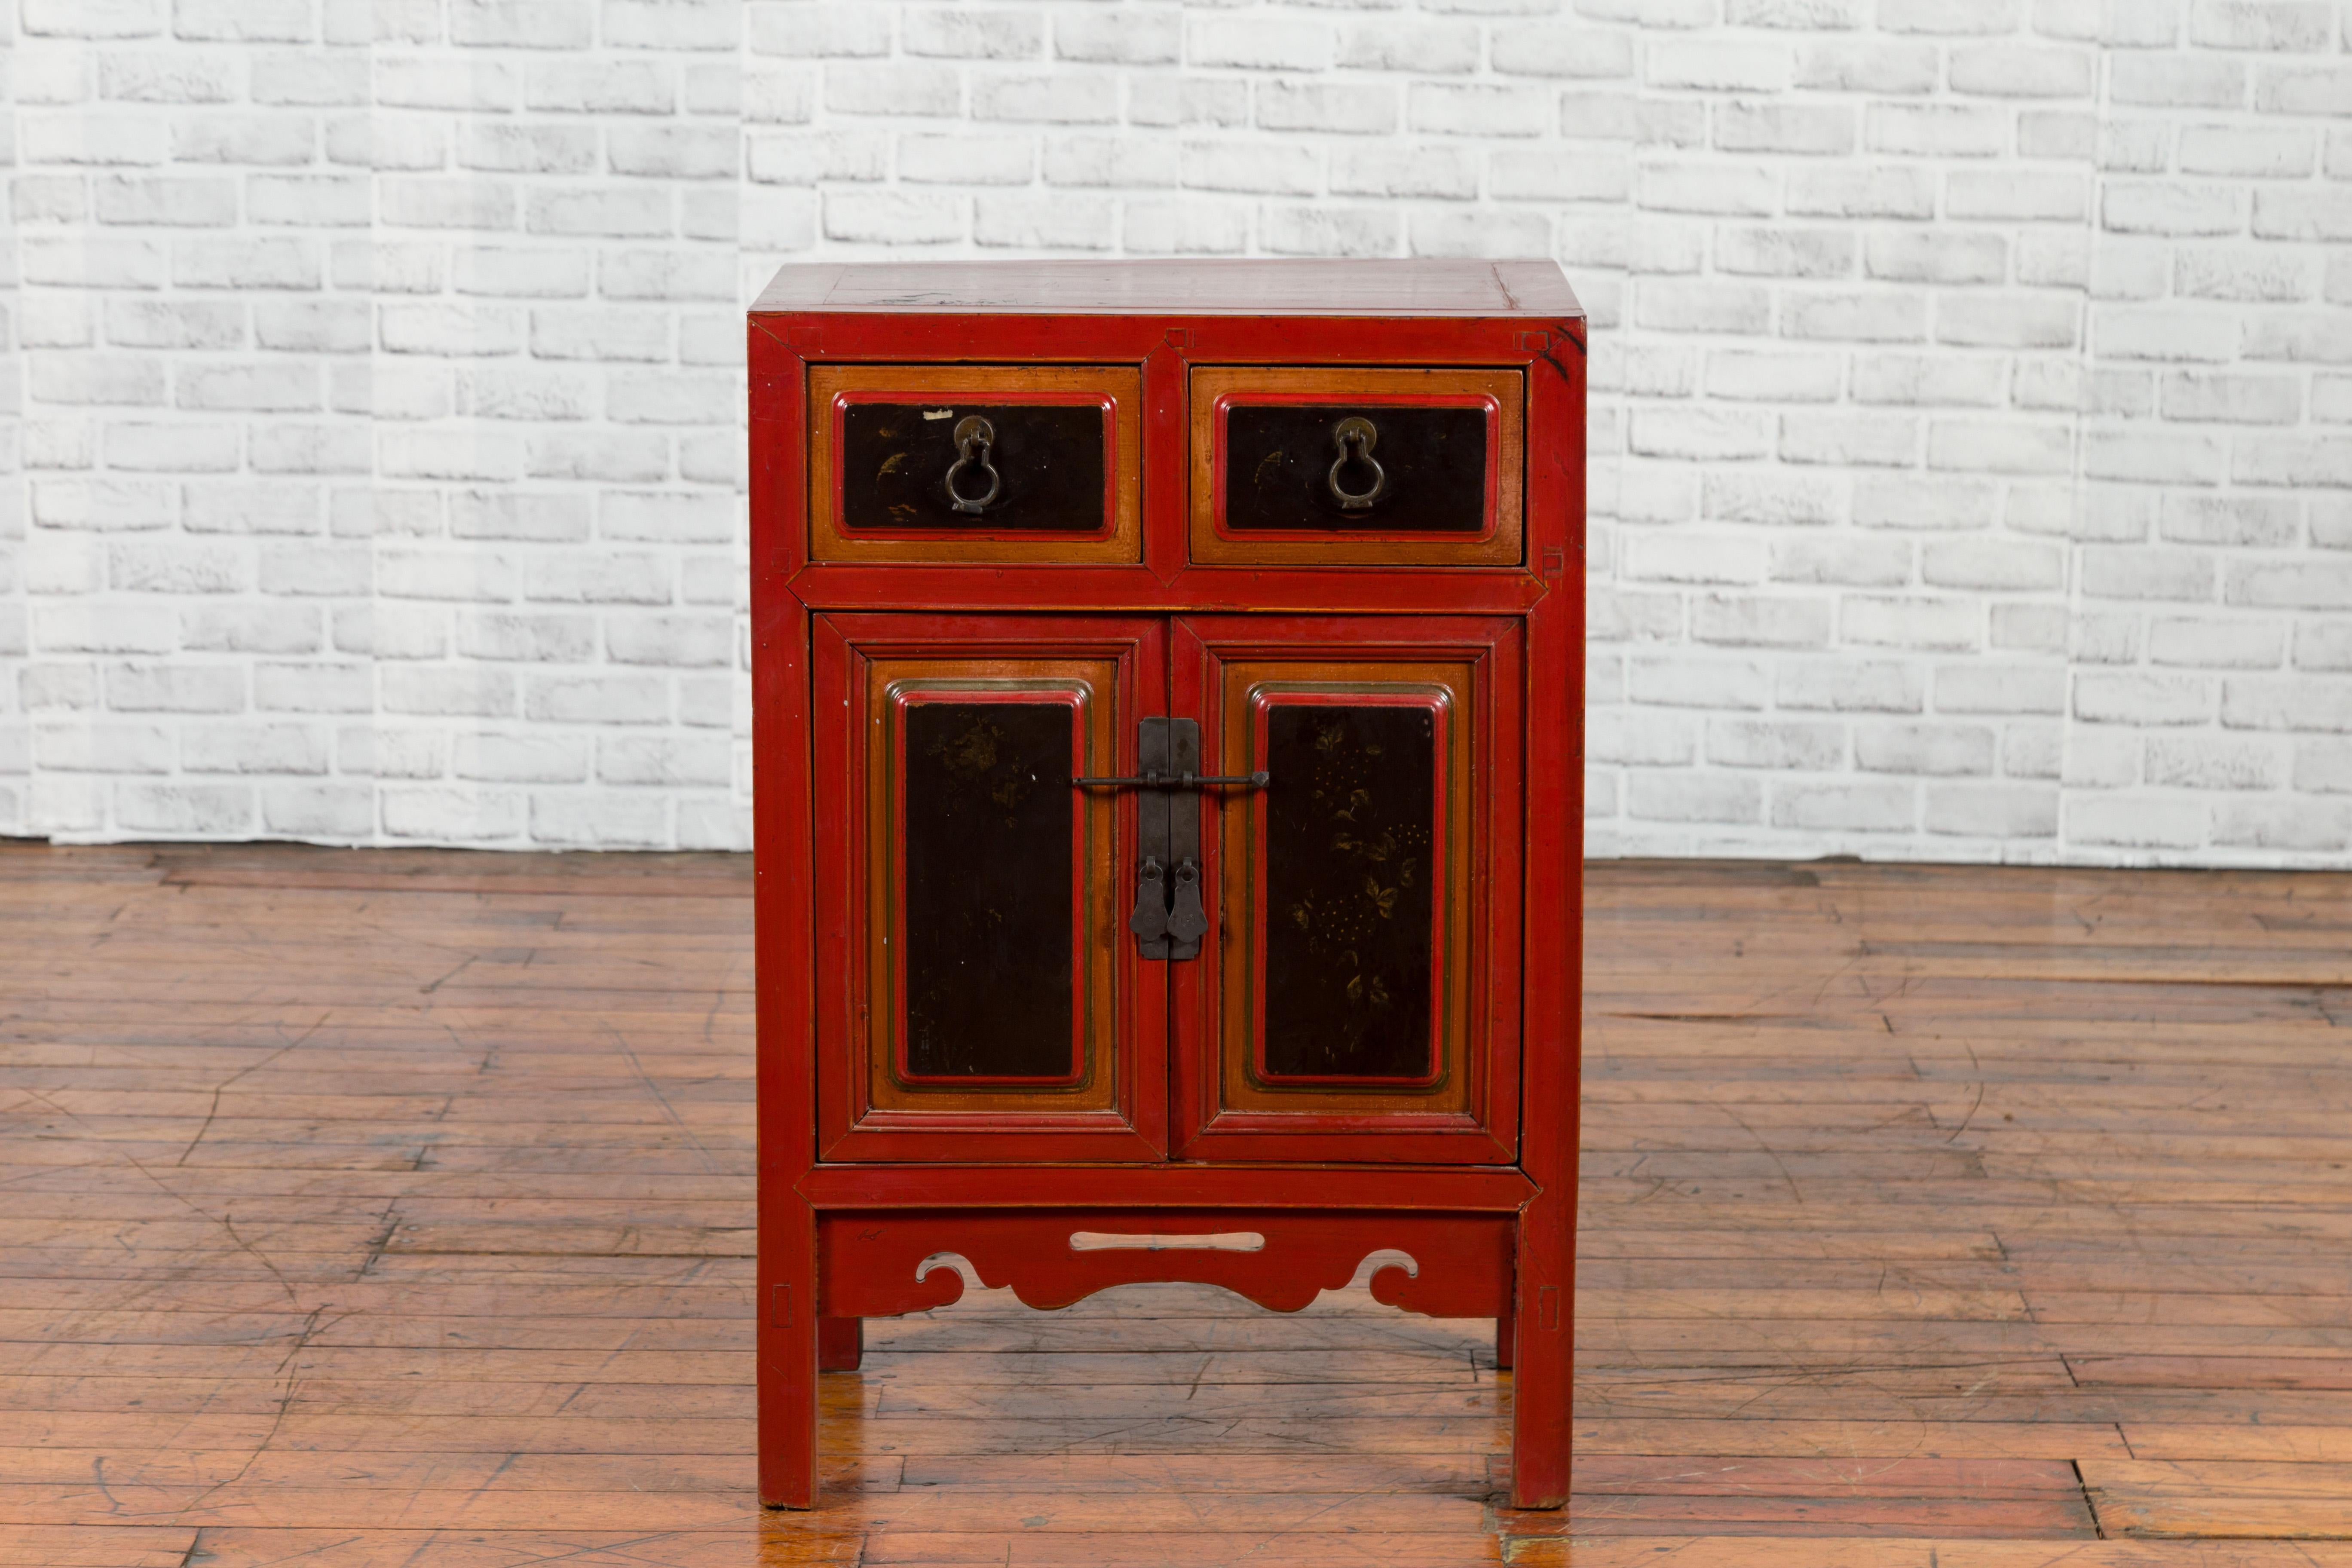 Small black and red cabinet
Chinese Qing dynasty 19th century cabinet.

A Chinese Qing dynasty period small black and red cabinet from the 19th century, with carved apron. Created in China during the 19th century, this small cabinet features a